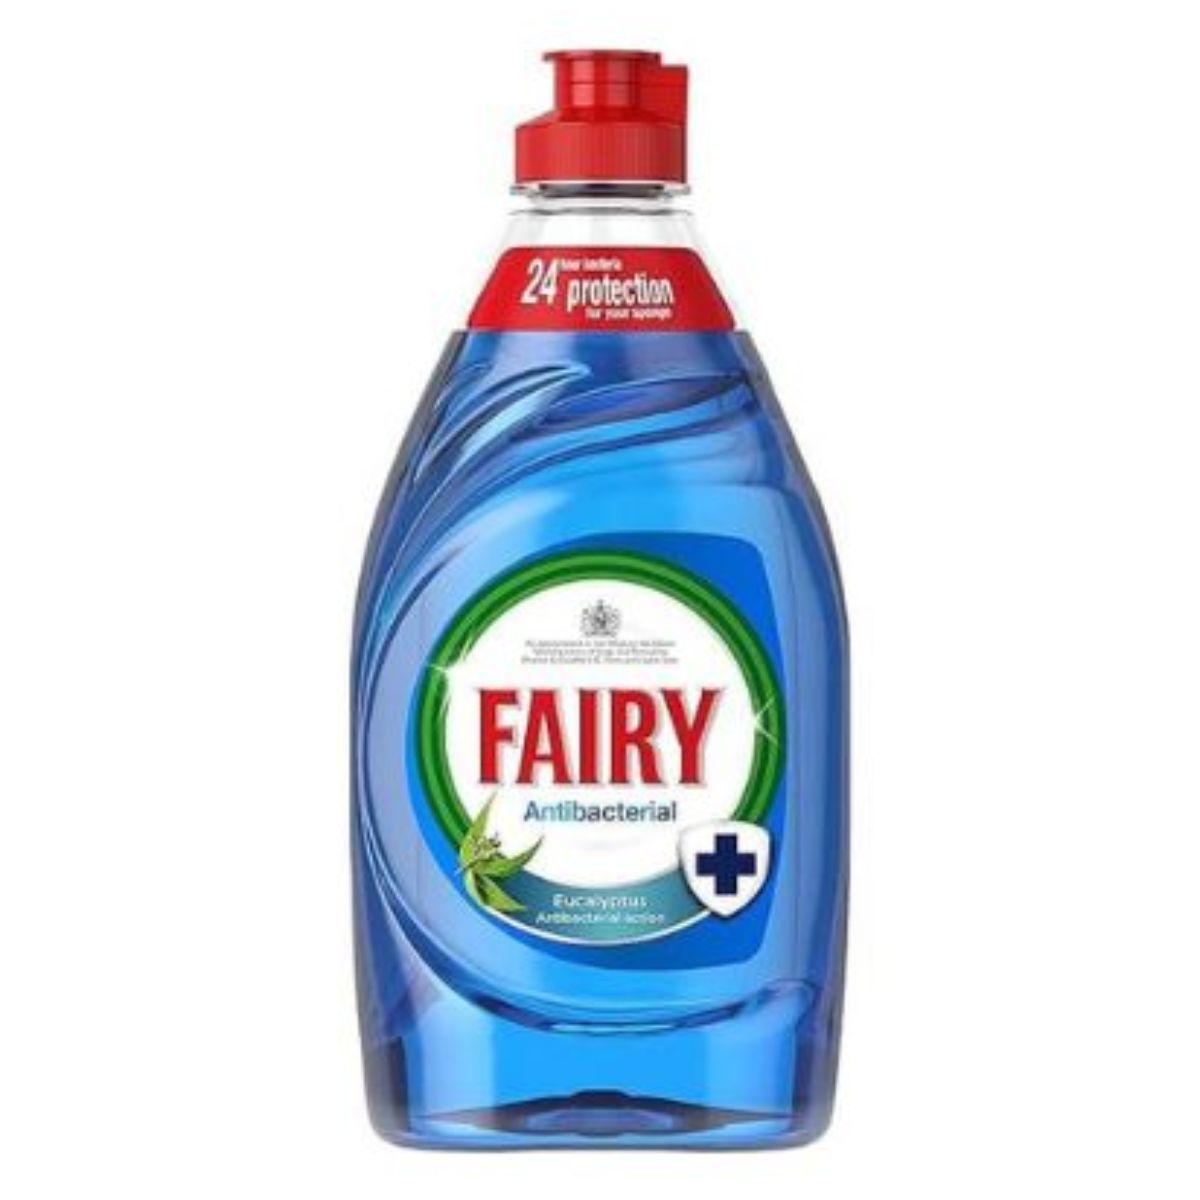 A bottle of Fairy - Platinum Washing Up Liquid Anti Bacterial - 383ml with a refreshing eucalyptus scent, featuring a red cap and a blue-and-white label.